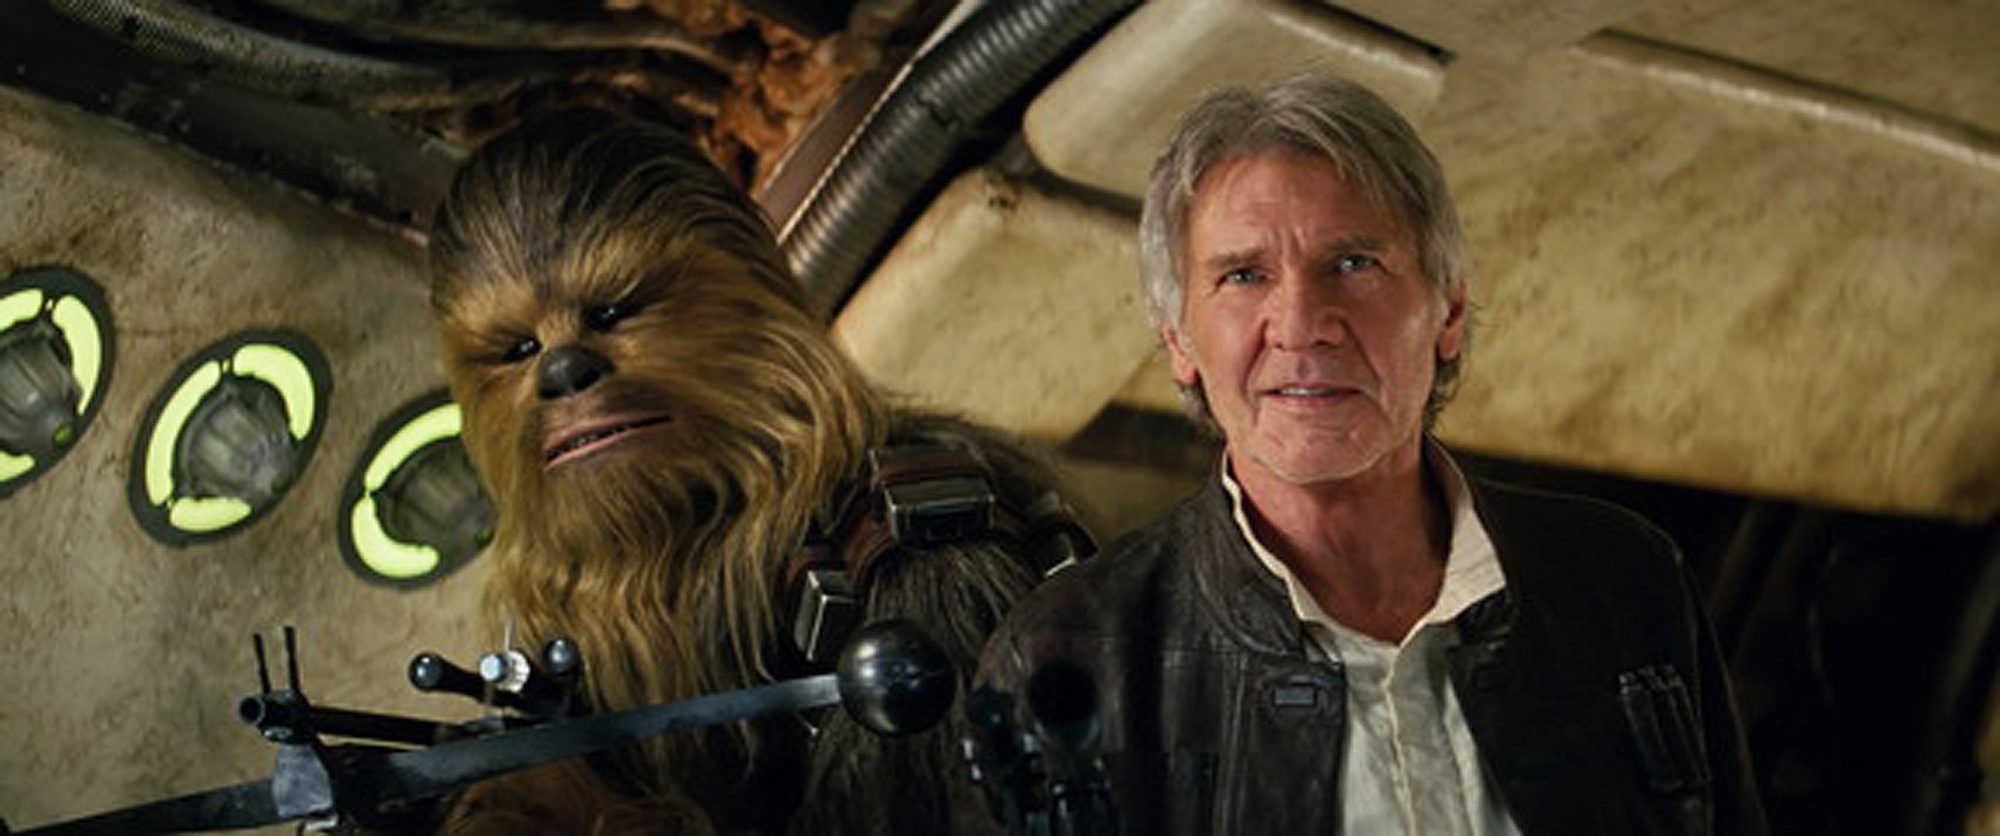 This photo provided by Lucasfilm shows Peter Mayhew as Chewbacca and Harrison Ford as Han Solo in ,Star Wars: The Force Awakens,, directed by J.J. Abrams. (AP Photo)